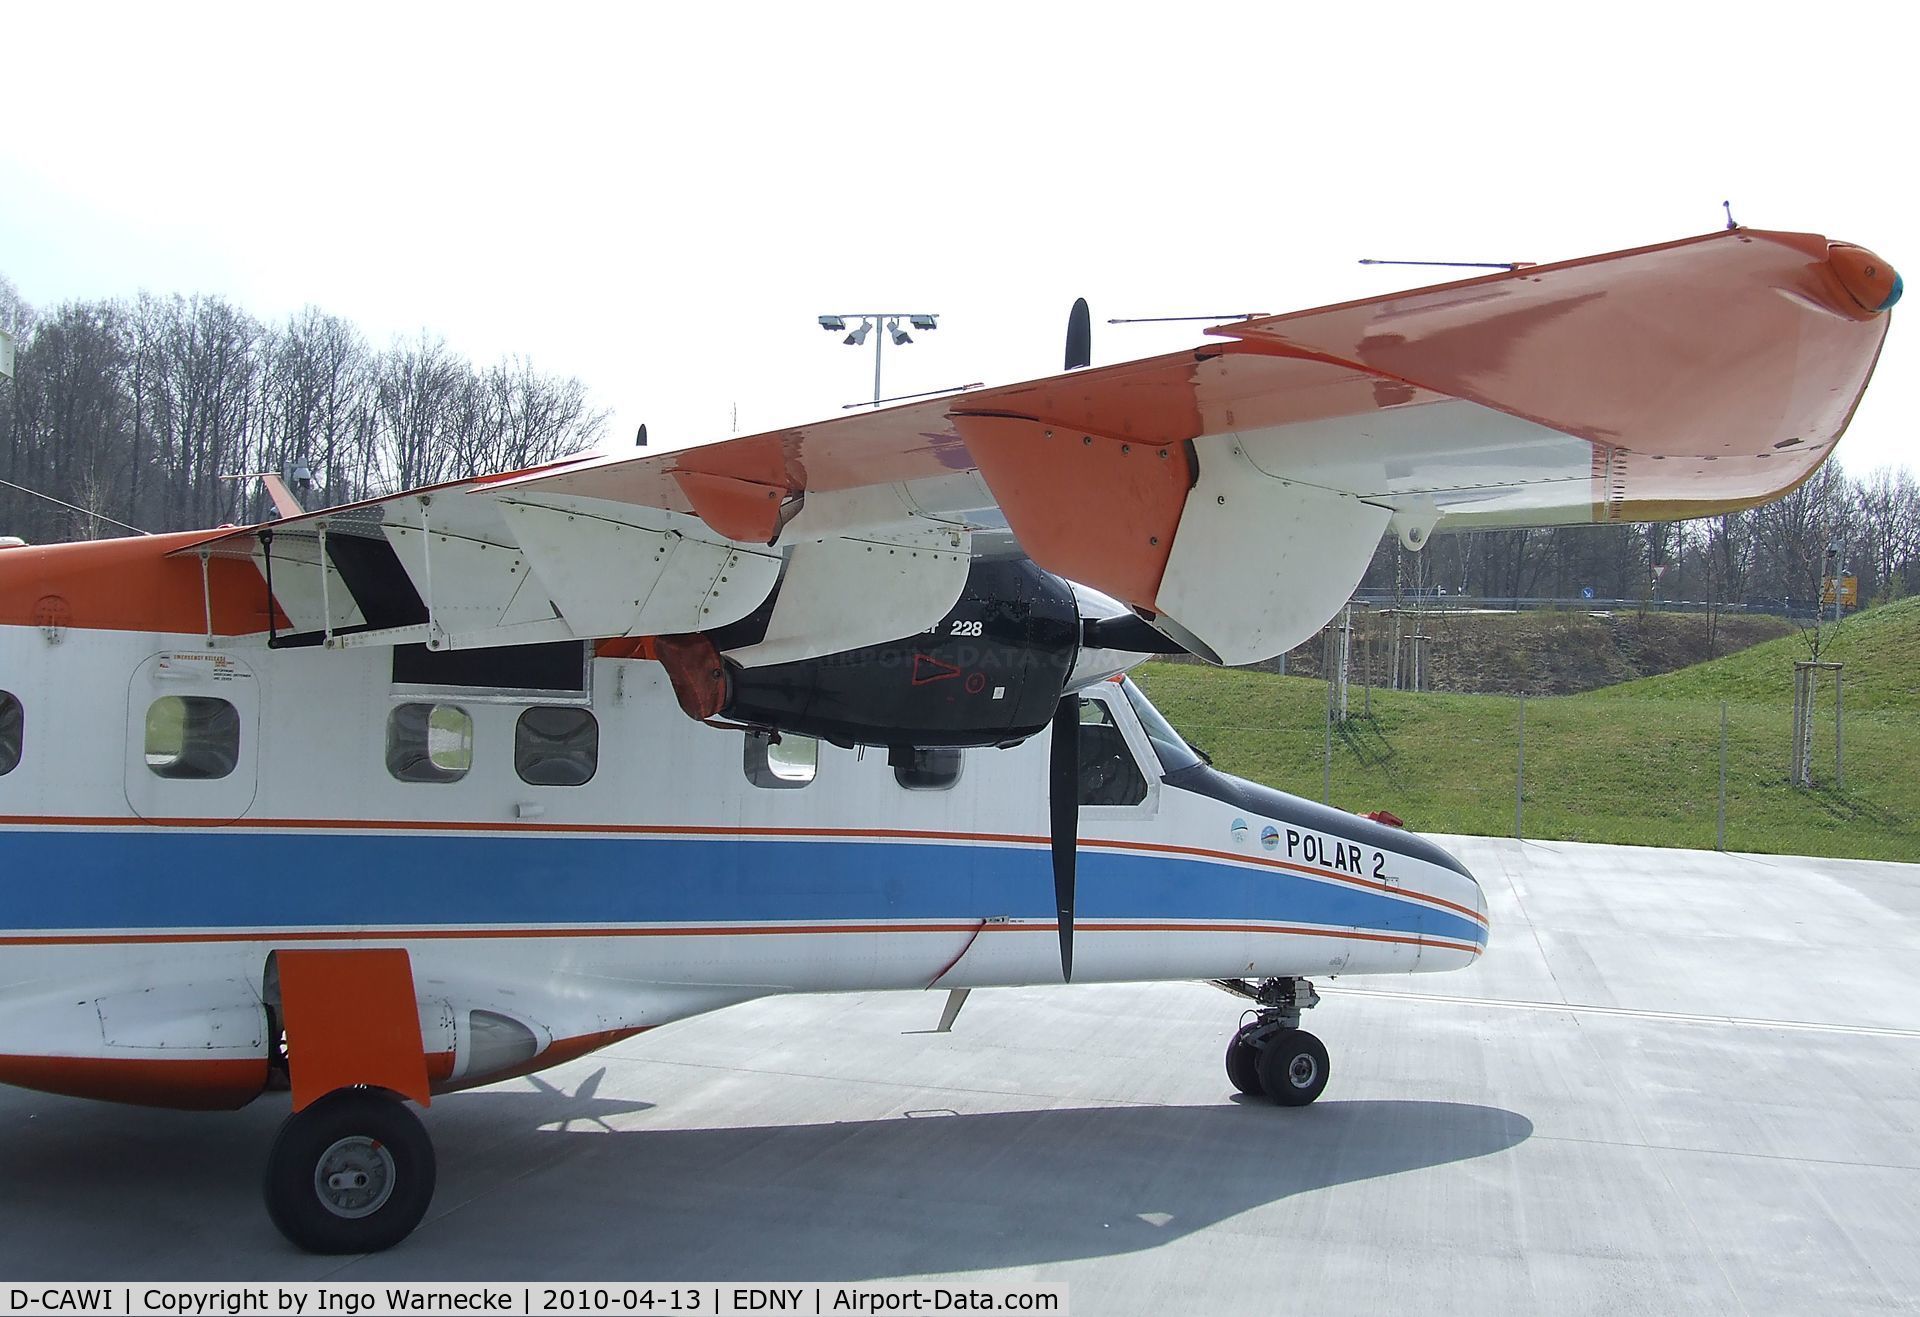 D-CAWI, 1983 Dornier 228-101 C/N 7014, Dornier Do 228-101 (formerly 'POLAR 2' operated by the German polar research institute (Alfred Wegener Institut)) standing outside the Dornier-Museum to be sold in May 2010. Before it had been exhibited at the Dornier Museum for some months.